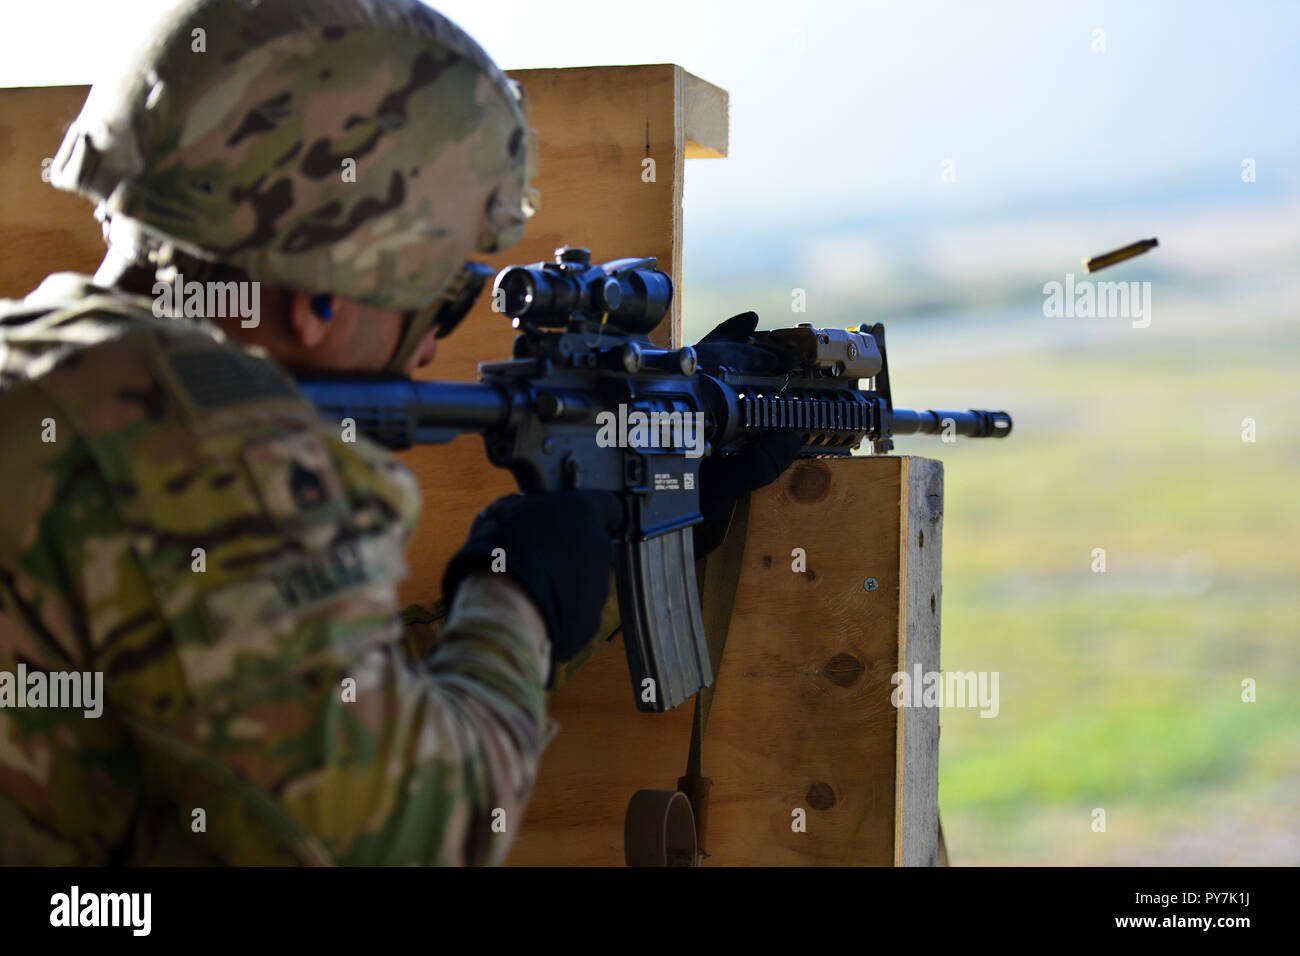 U.S. Army Paratrooper assigned to the 1st Battalion, 503rd Infantry Regiment, 173rd Airborne Brigade engages a pop-up targets with M4 carbine in kneeling position during the marksmanship training at Cao Malnisio Range, Pordenone, Italy, Oct. 24, 2018. The 173rd Airborne Brigade is the U.S. Army Contingency Response Force in Europe, capable of projecting ready forces anywhere in the U.S. European, Africa or Central Commands' areas of responsibility. (U.S. Army Photos by Paolo Bovo) Stock Photo